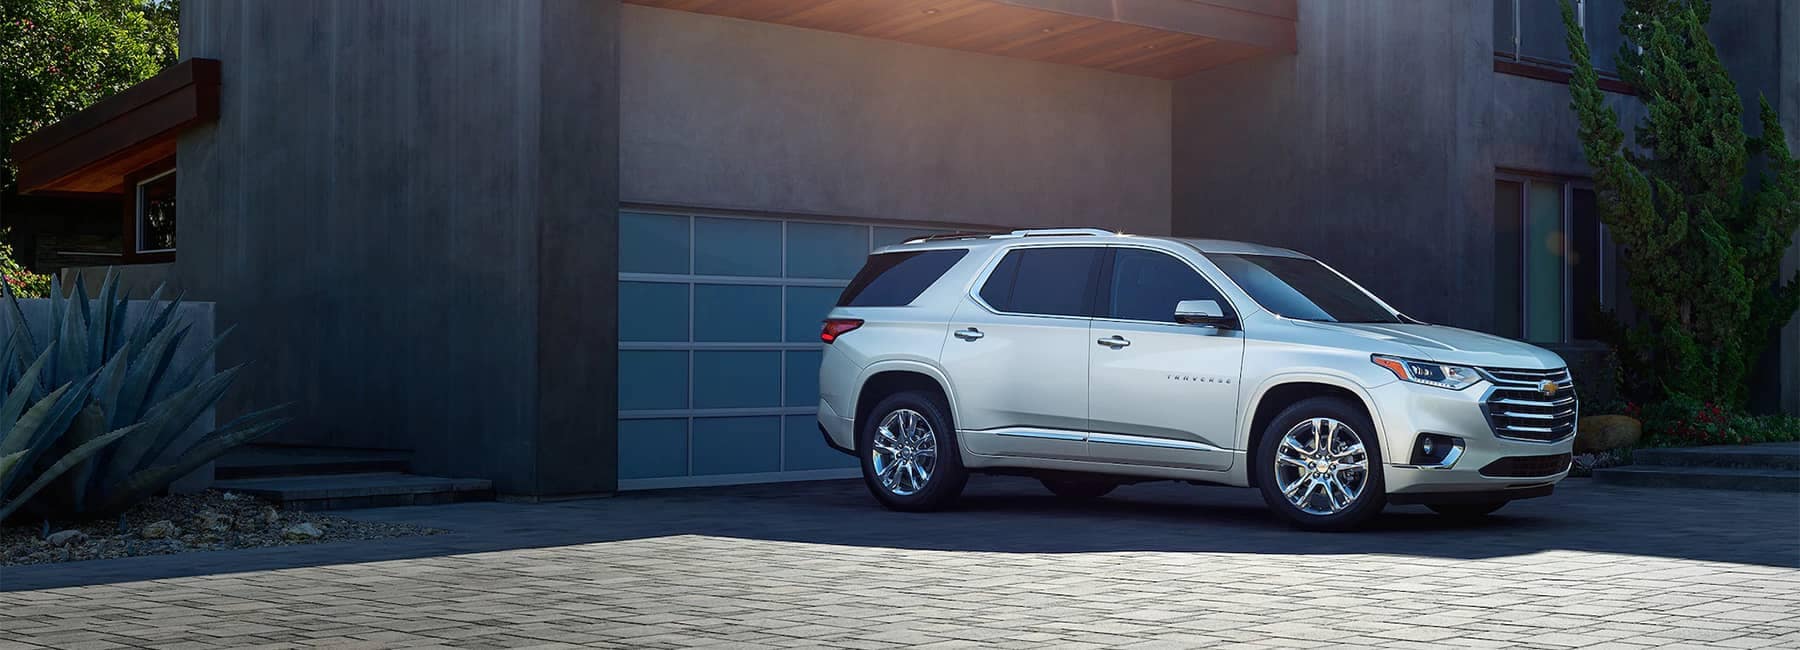 2020 White Chevrolet Traverse Parked Angle